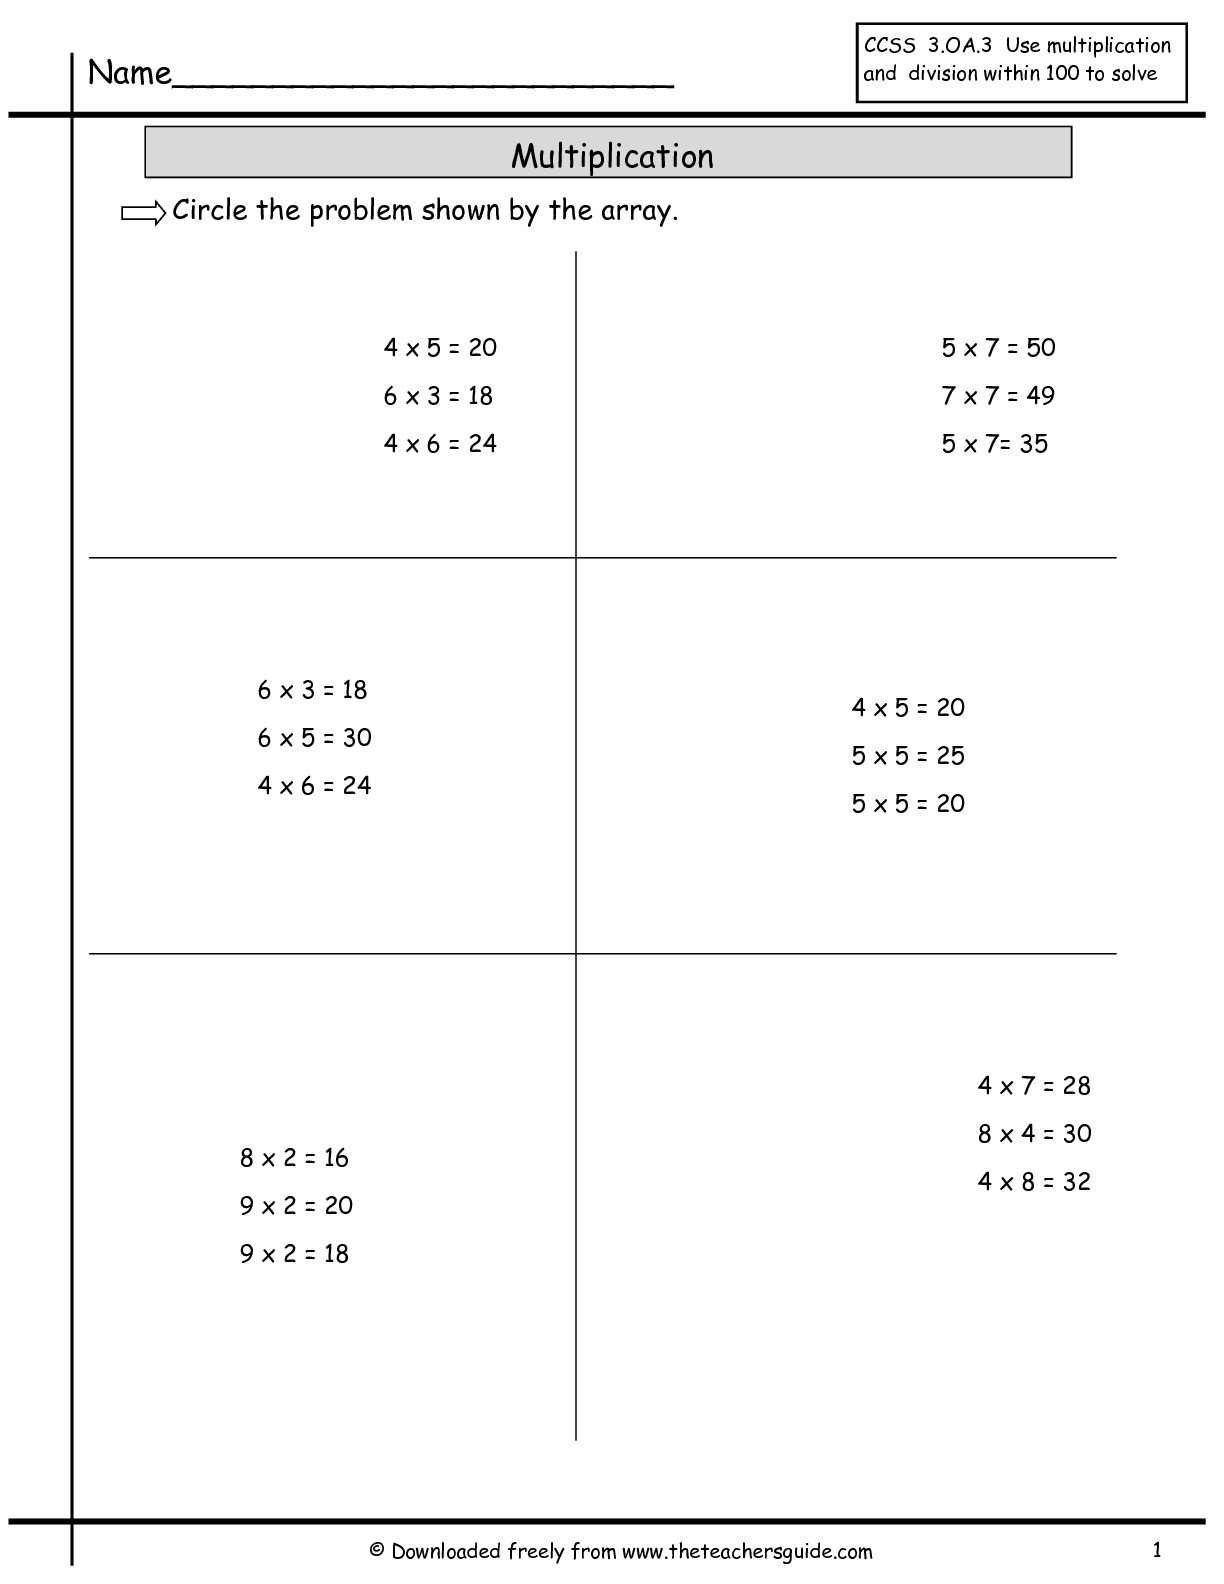 Multiplication Array Worksheets From The Teacher's Guide for Printable Multiplication Array Worksheets